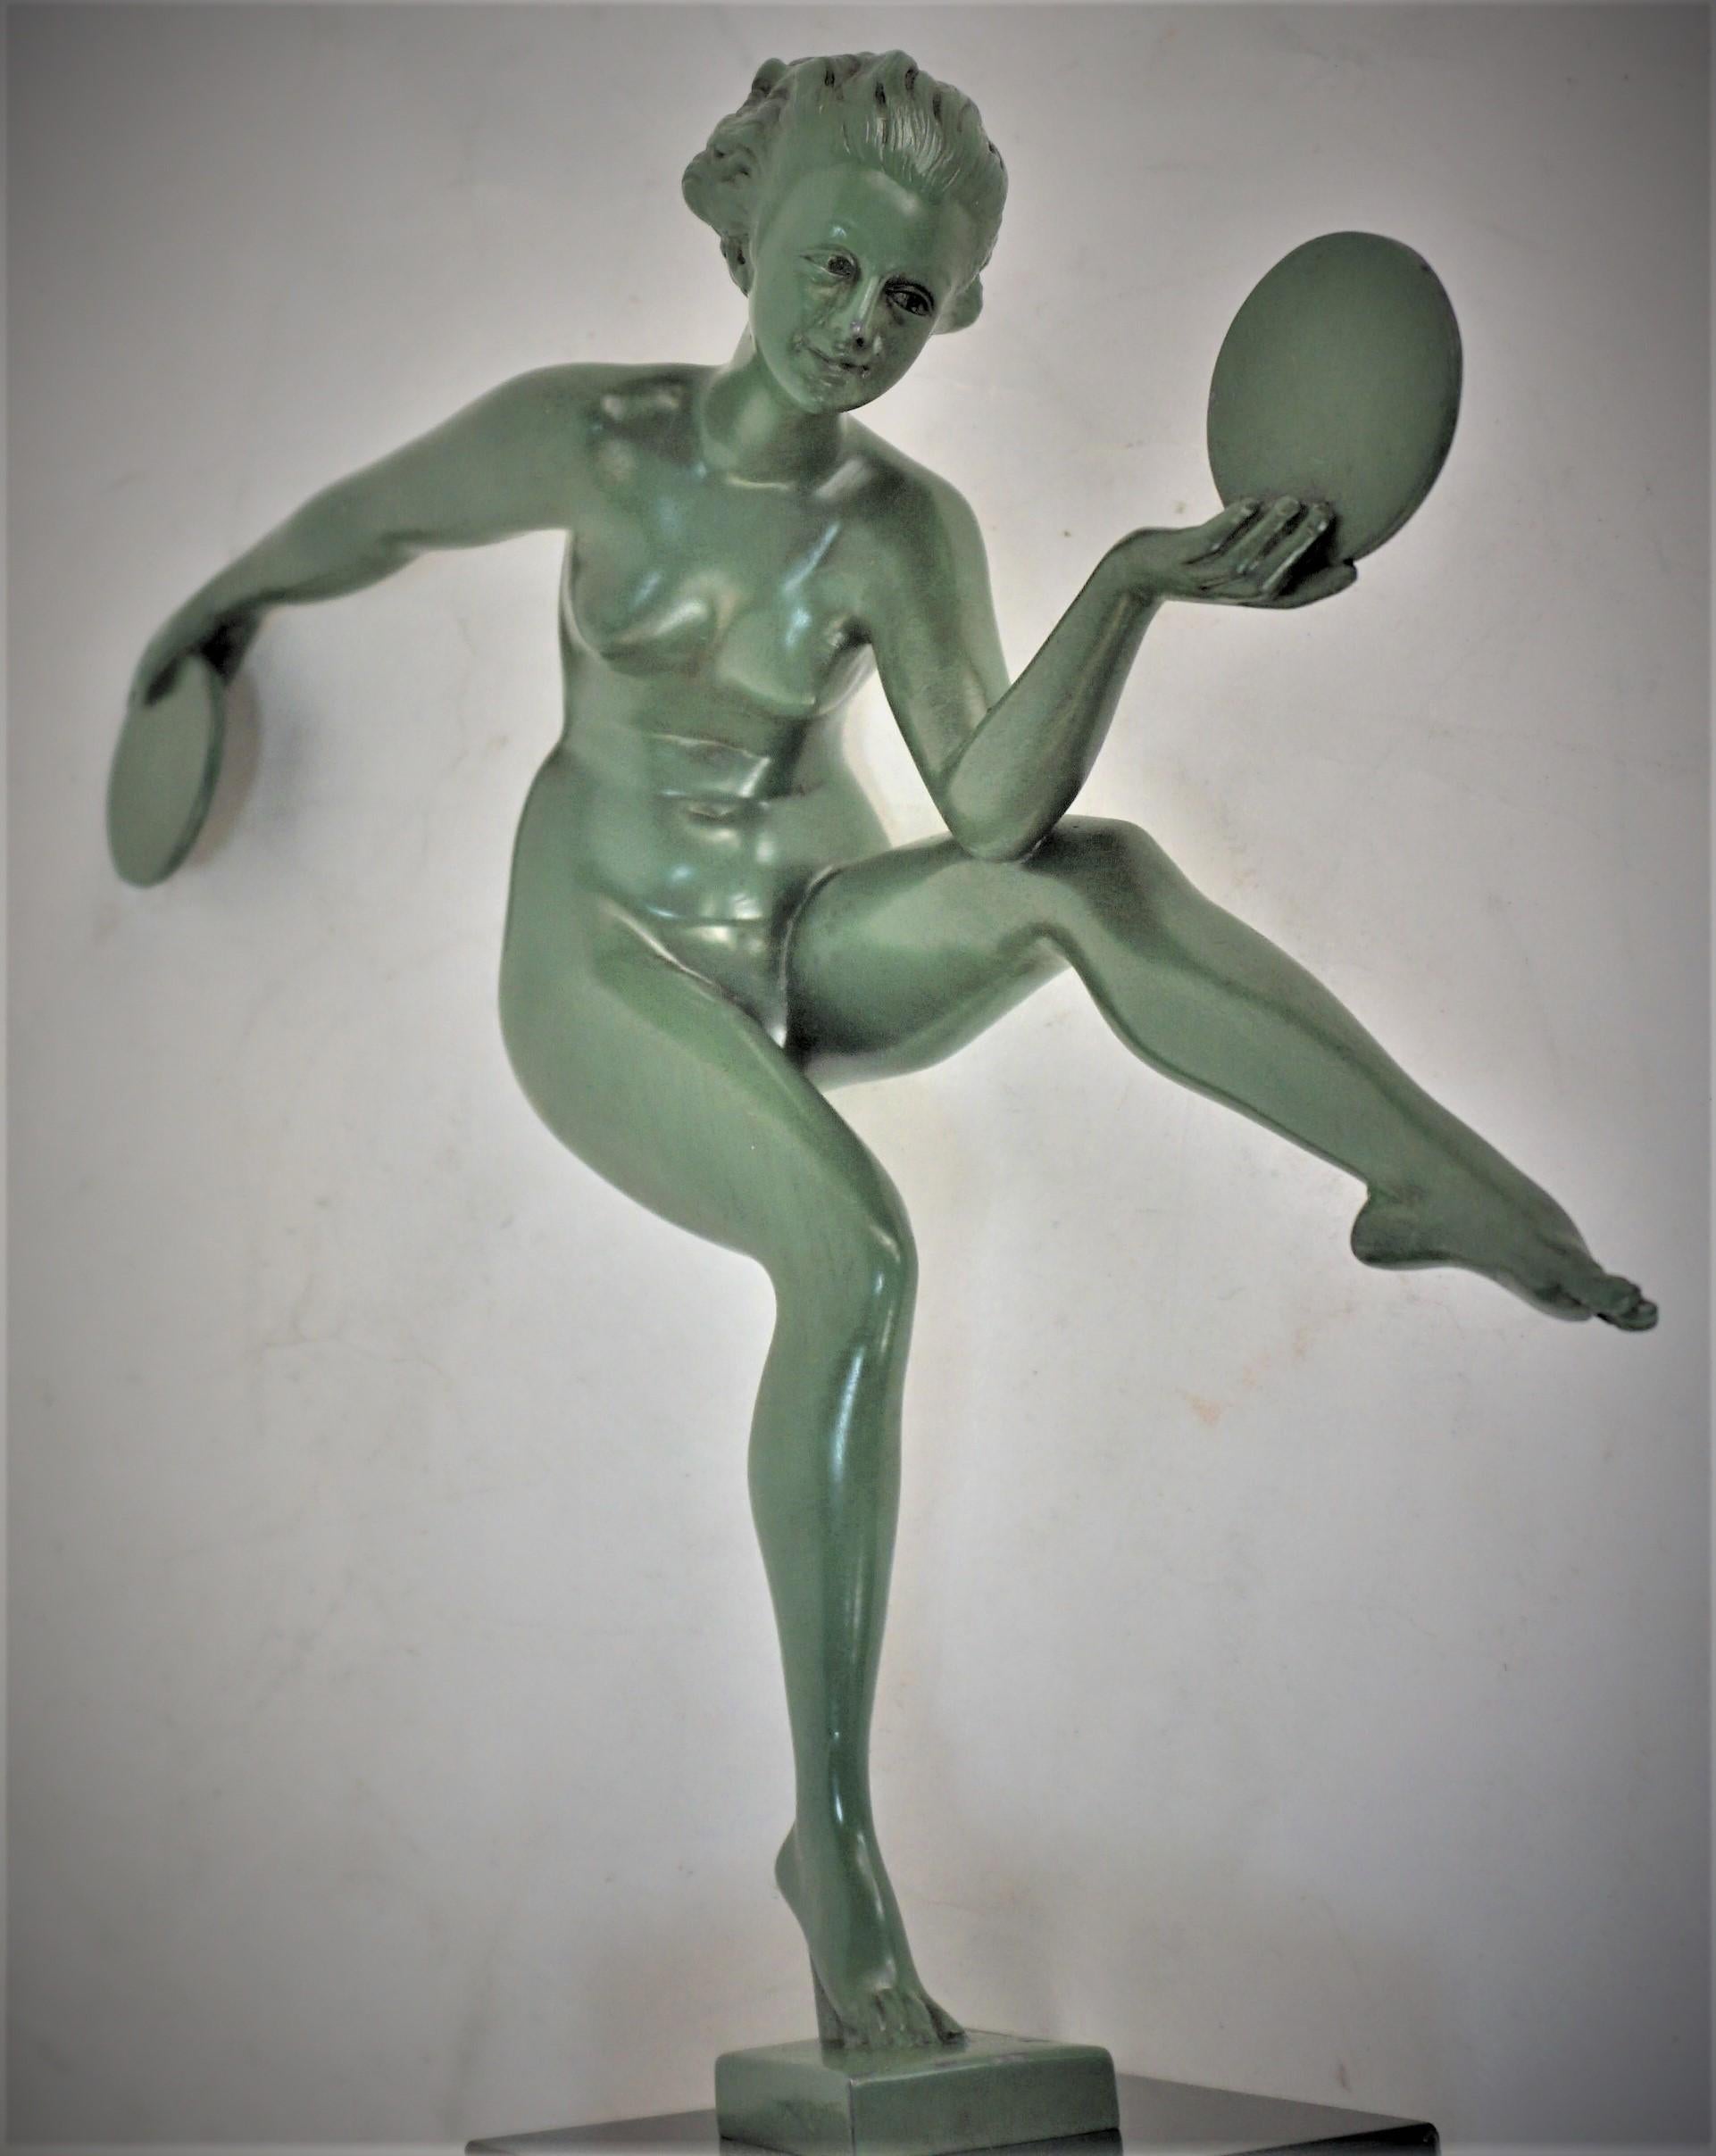 Mid-20th Century French Art Deco Disc Dancer by Alexandre-Joseph Derenne for Max Le Verrier For Sale